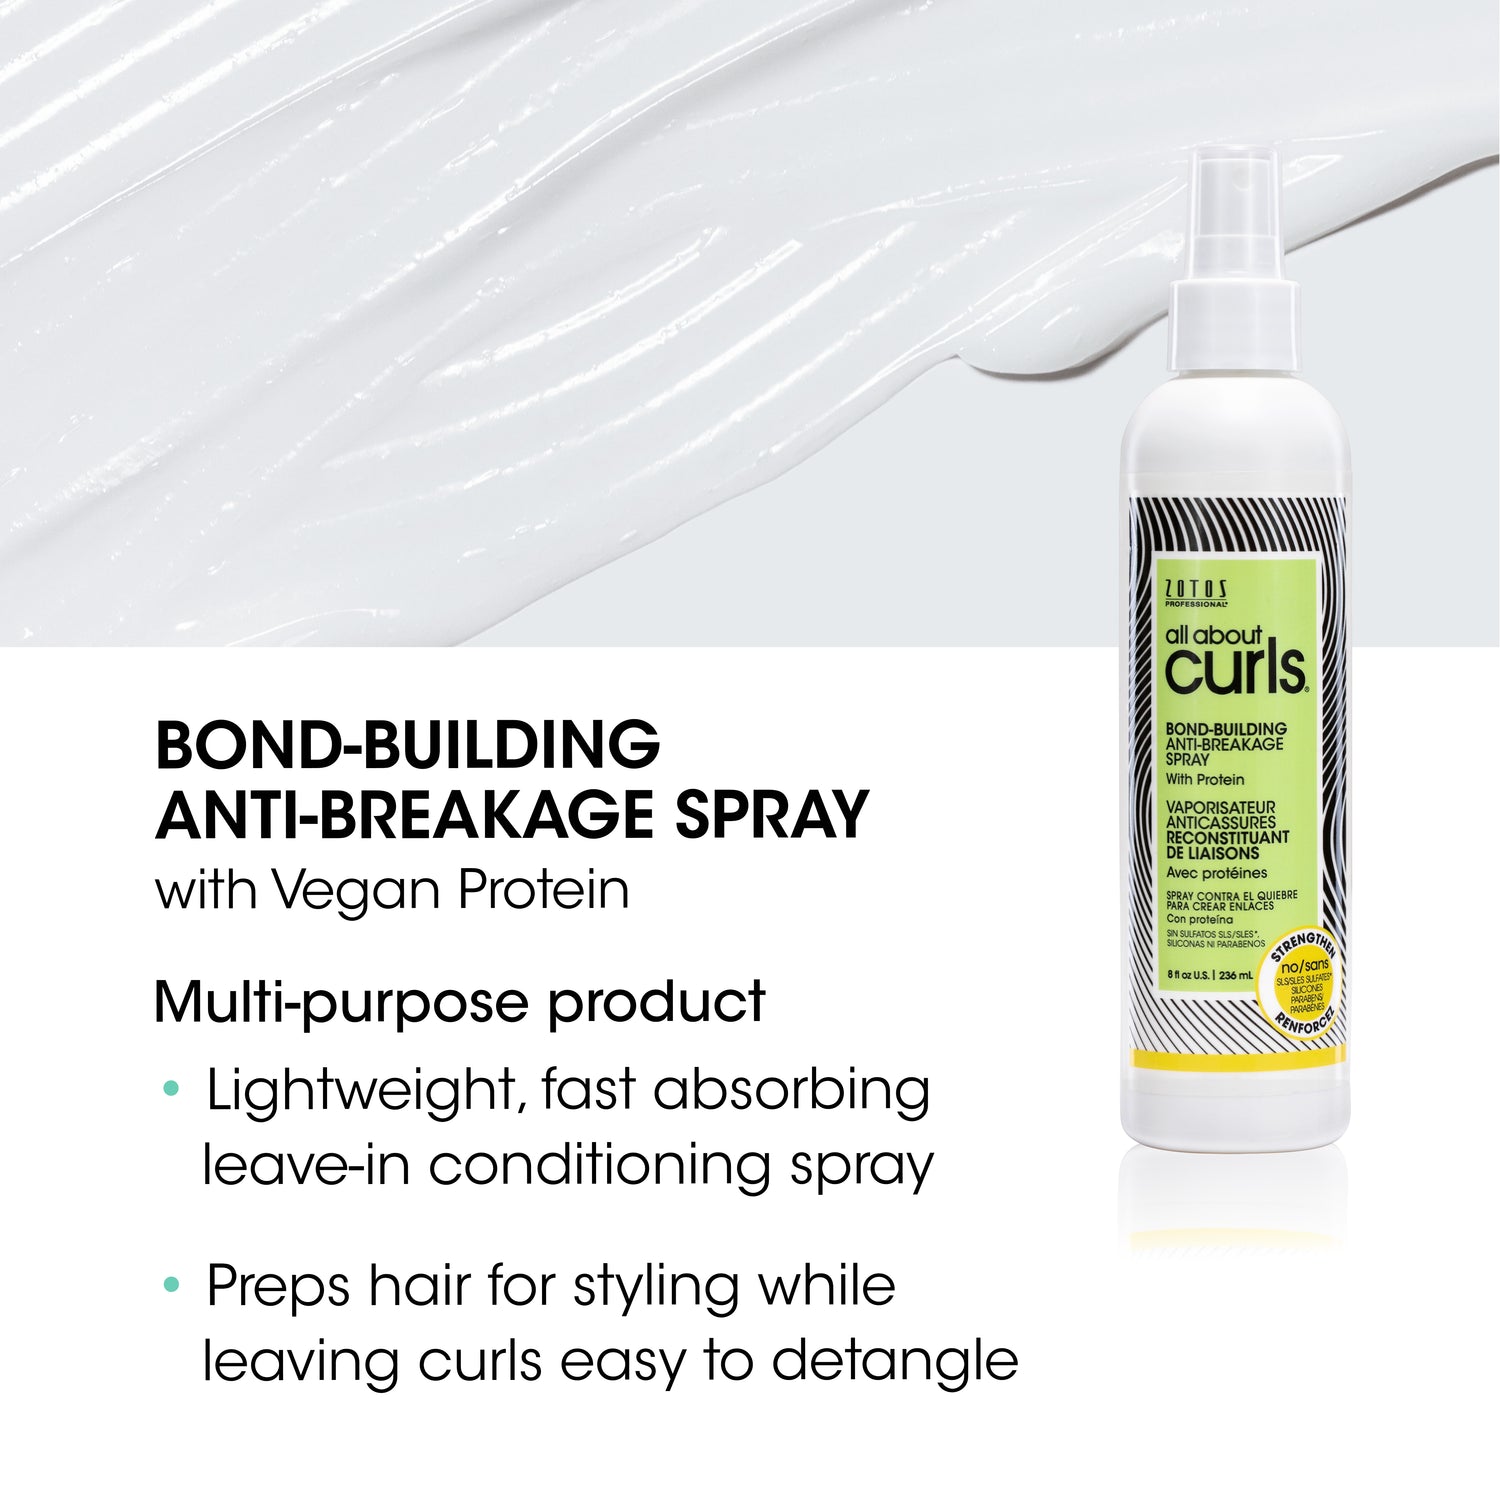 All About Curls® Bond Building Anti-Breakage Spray